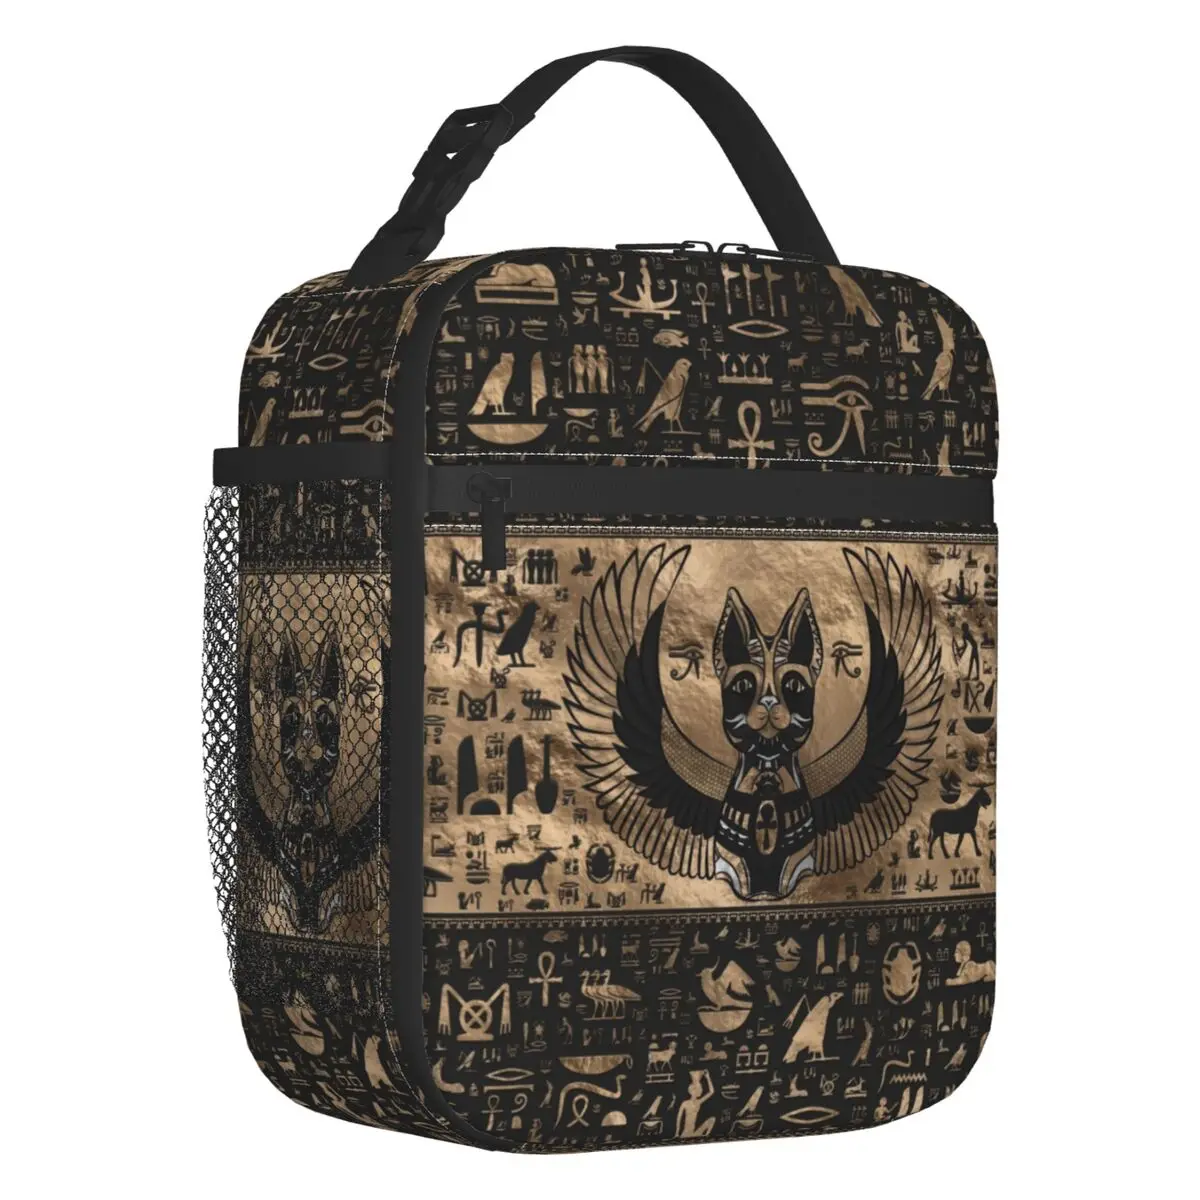 

Egyptian Cat Goddess Bastet Resuable Lunch Box Multifunction Ancient Egypt Symbol Cooler Thermal Food Insulated Lunch Bag Office